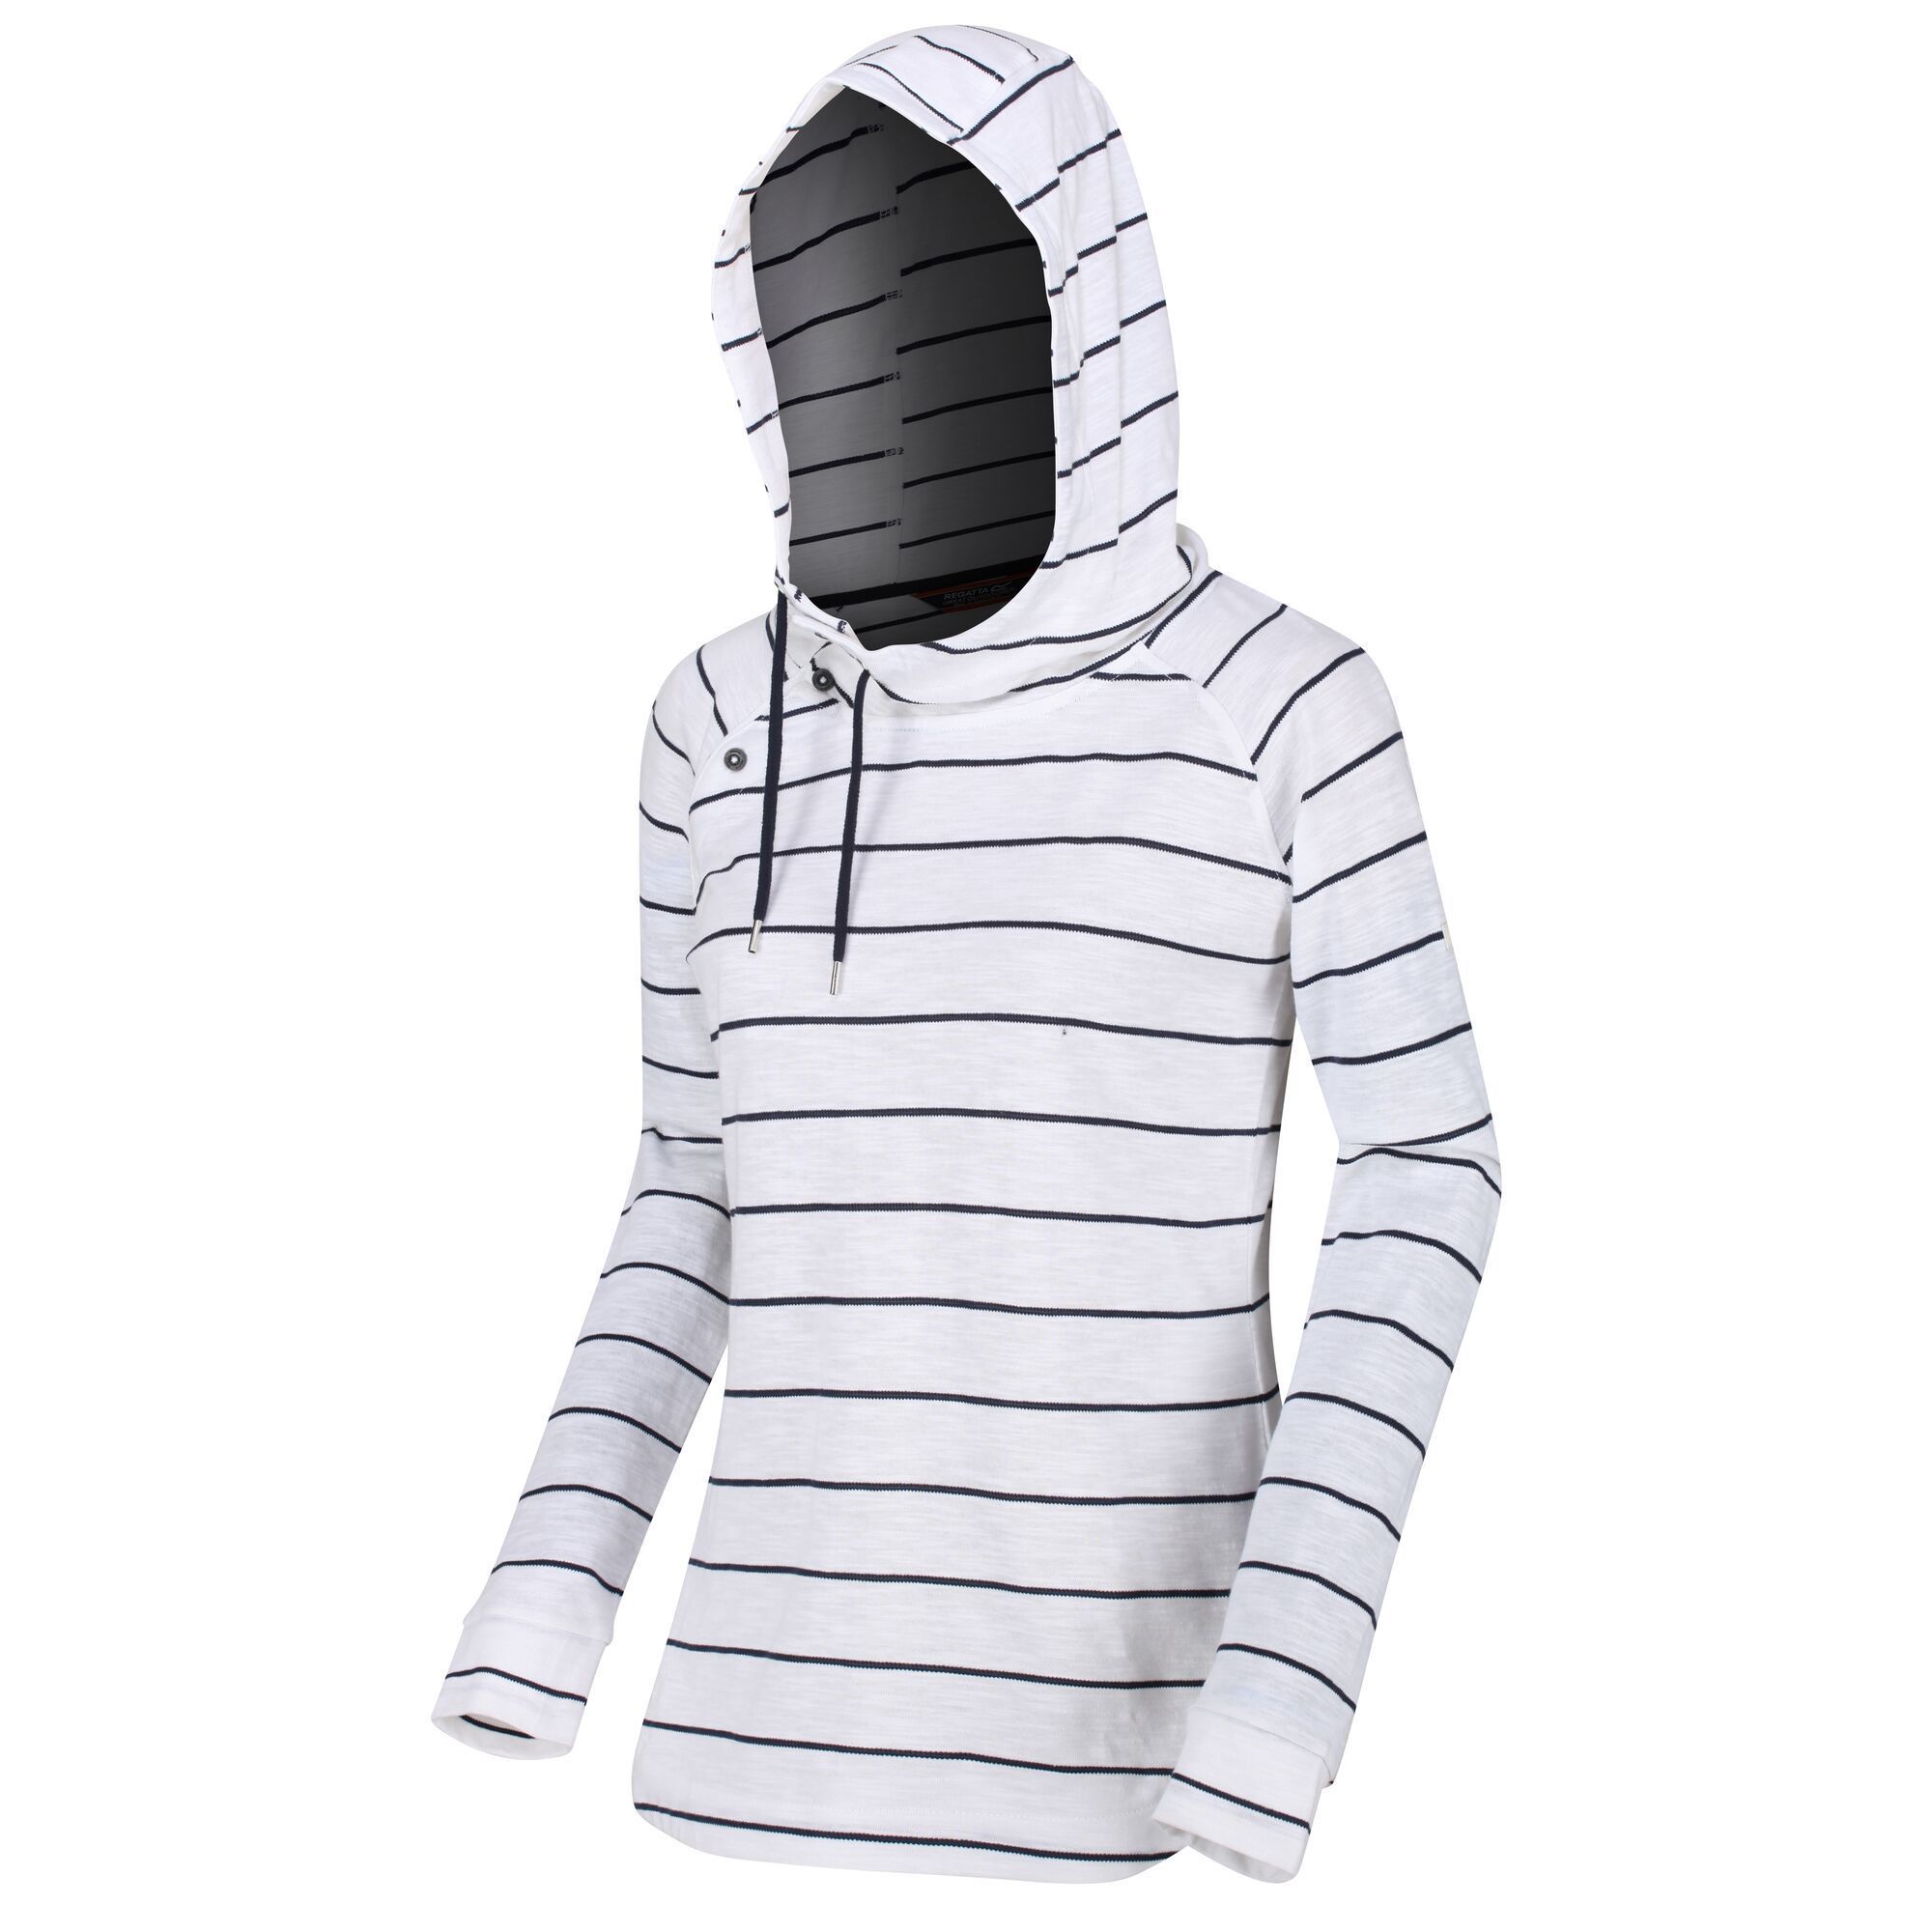 Material: 100% Polyester. Soft-wearing coolweave fabric hoodie with drawcord adjusters. Asymmetric button placket.